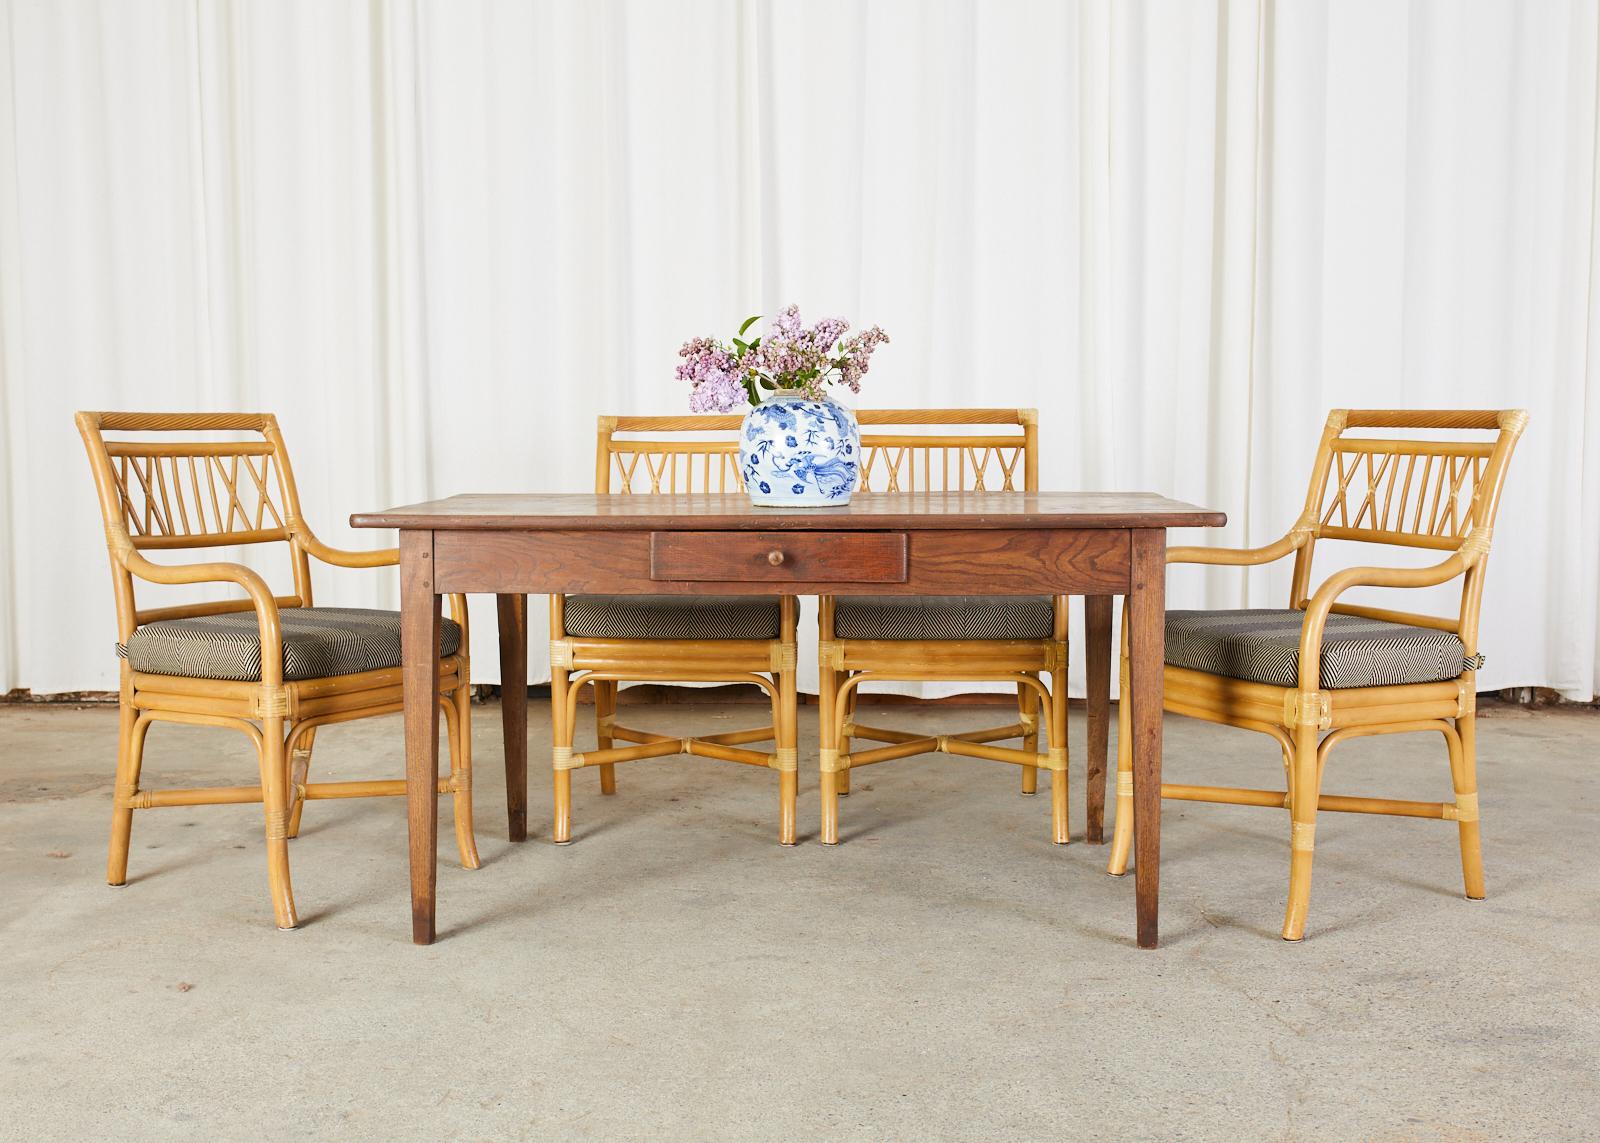 Impressive set of four bamboo rattan dining armchairs made in the manner and style of McGuire. The chairs have a square back with a faux rope twist top rail. The arms gracefully curve down to the generous seat topped with a loose seat cushion. The